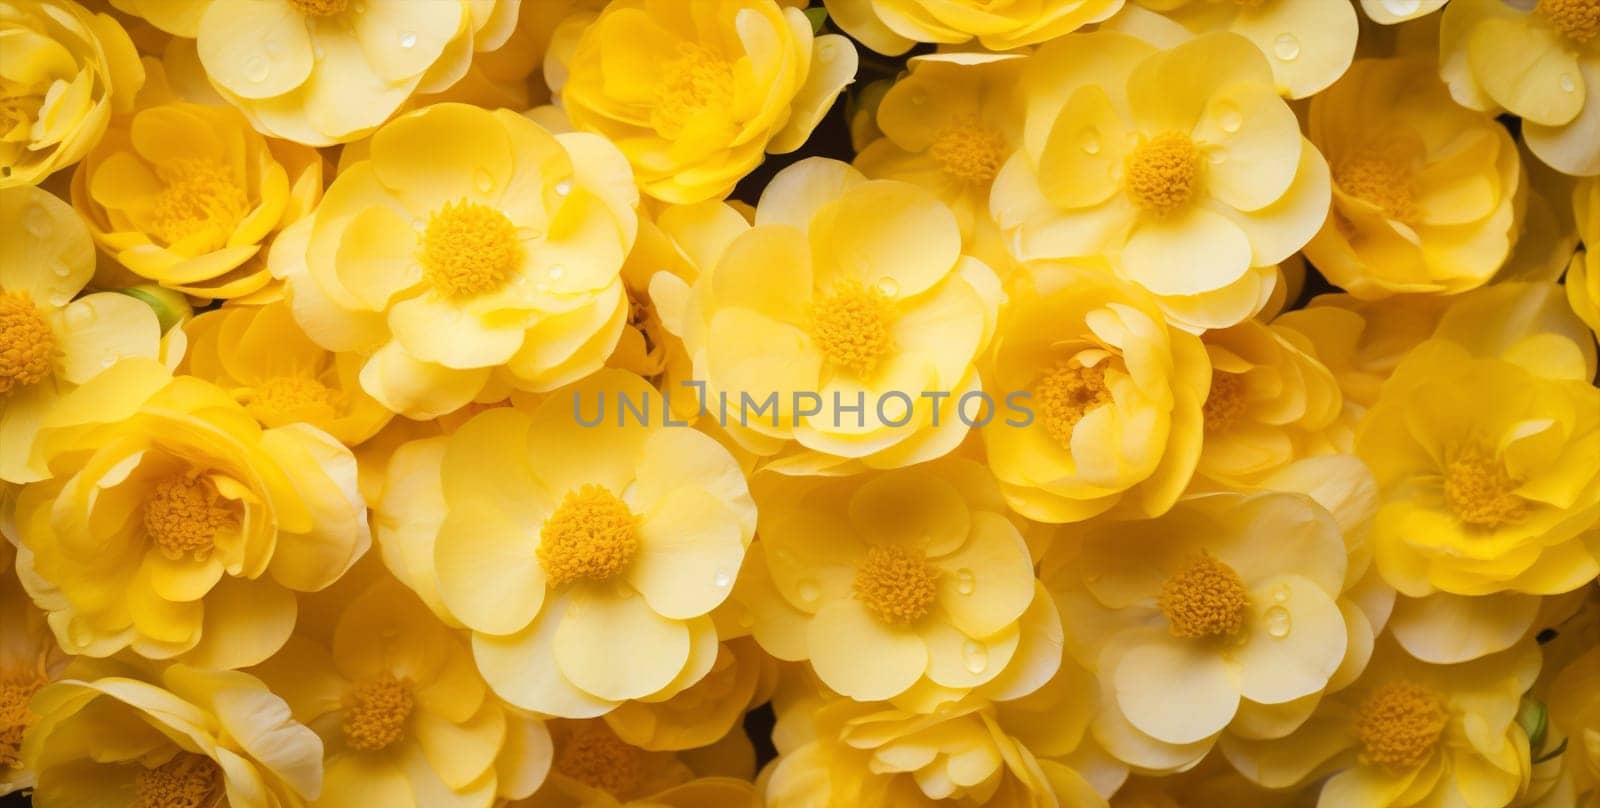 Up floral yellow gardening chrysanthemum mockup plants group flora beauty flower bouquet close botany summer nature bright background blossom bloom